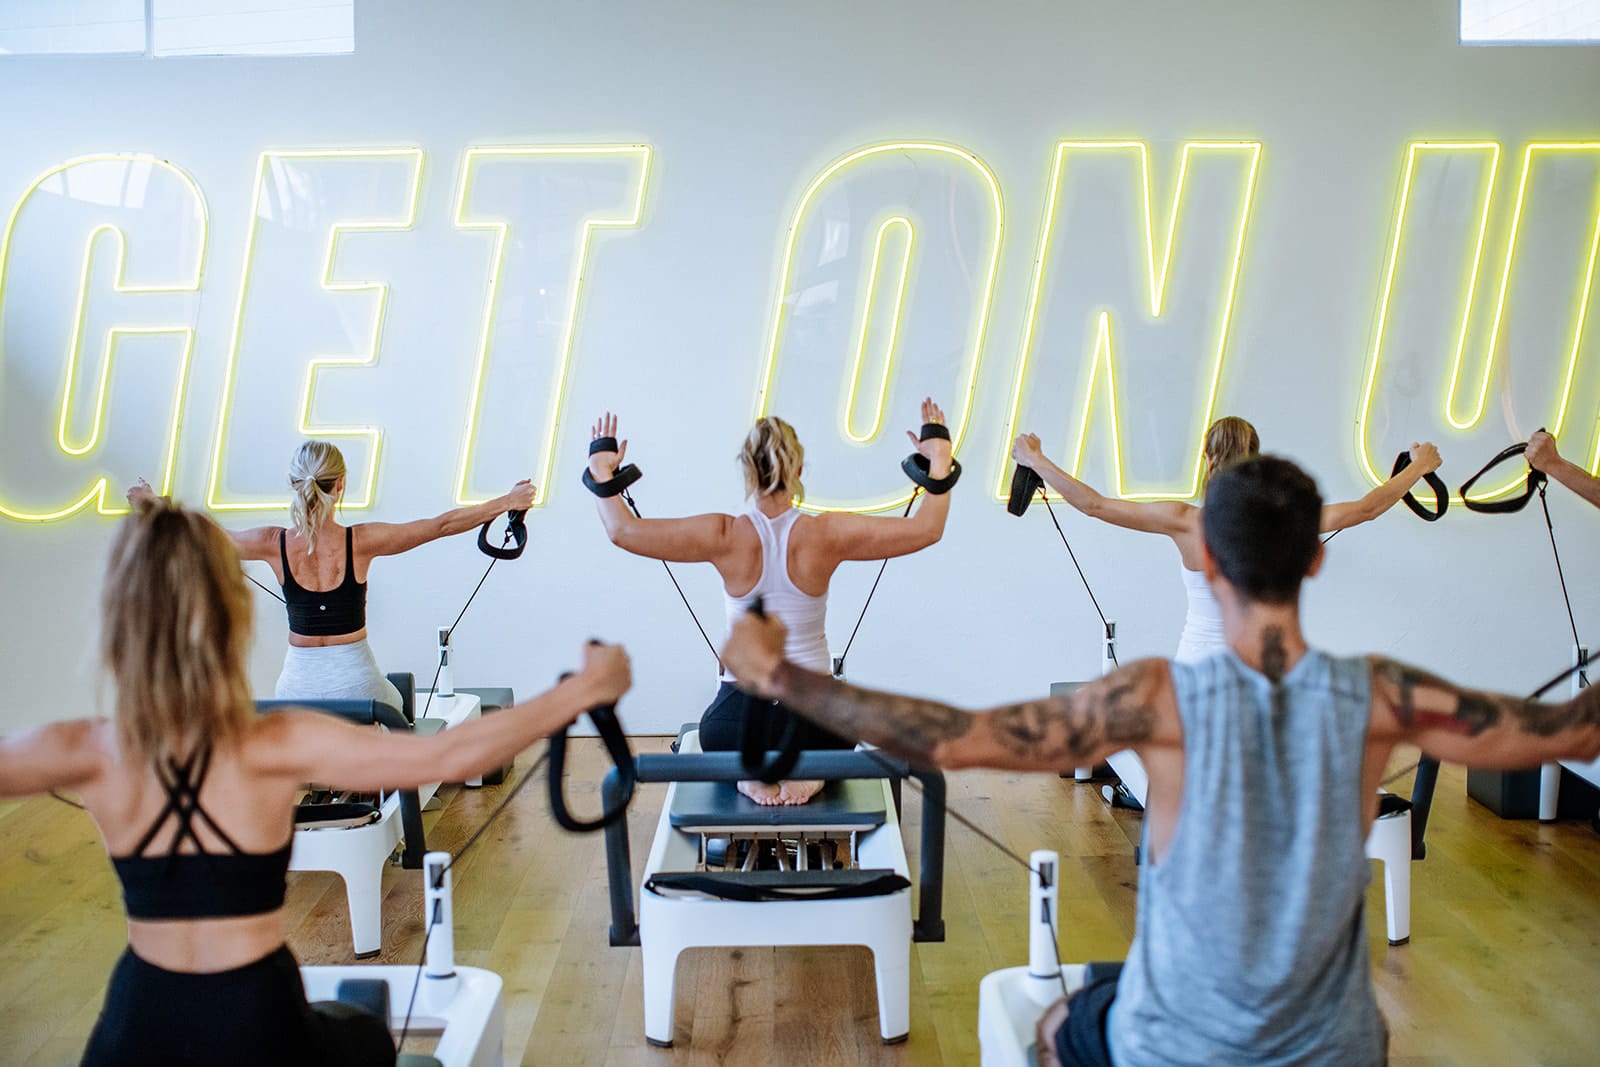 Reformer Pilates room is full of happy people exercising together in at Upstate Class. An aesthetic studio interior creates an uplifting space to workout.